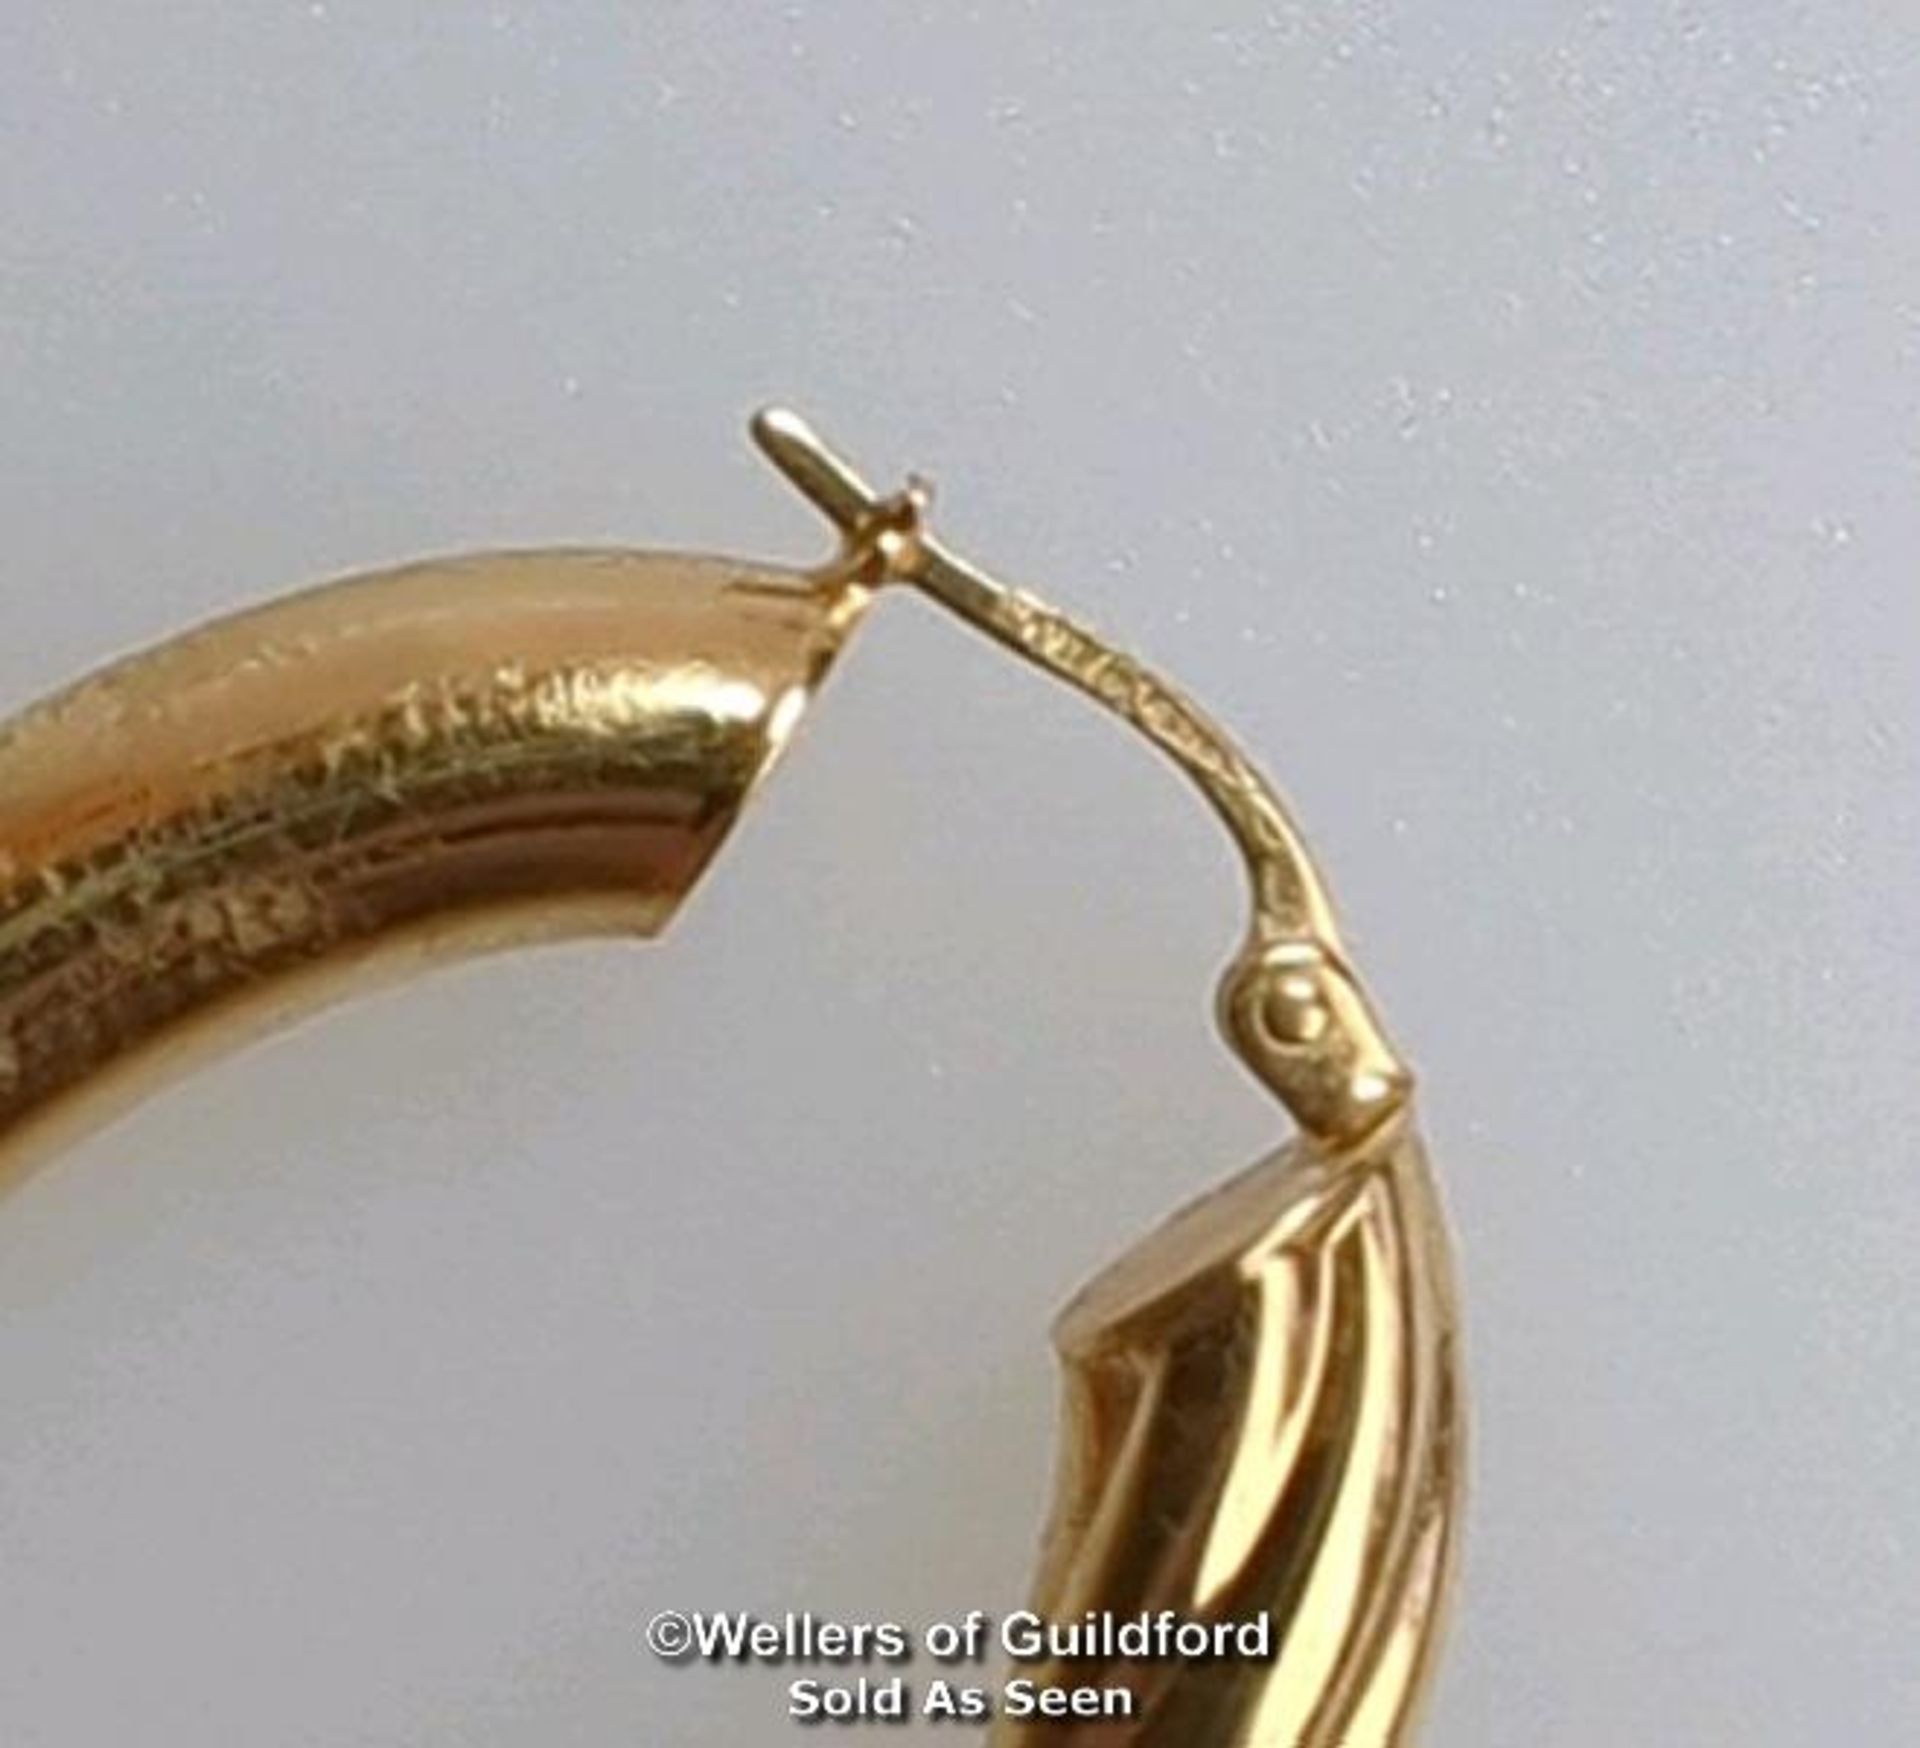 A pair of oval hoop earrings in hallmarked 9ct gold, length 4cm, gross weight 6.83g - Image 2 of 4